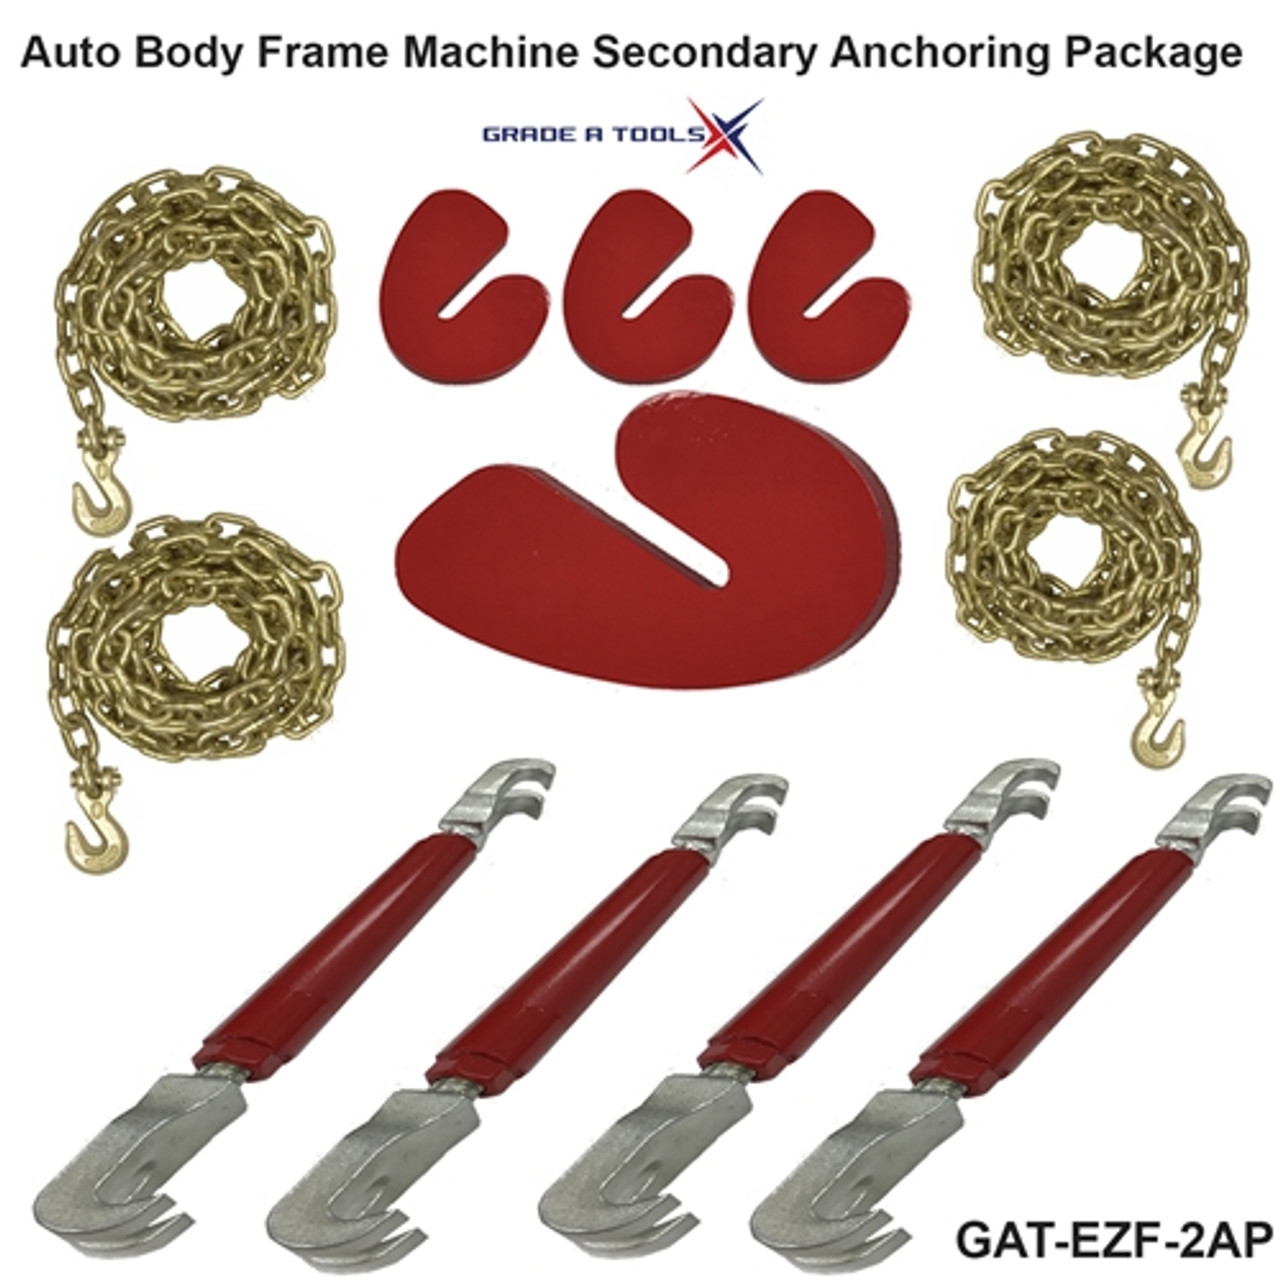 Frame Machine Secondary Anchoring Package